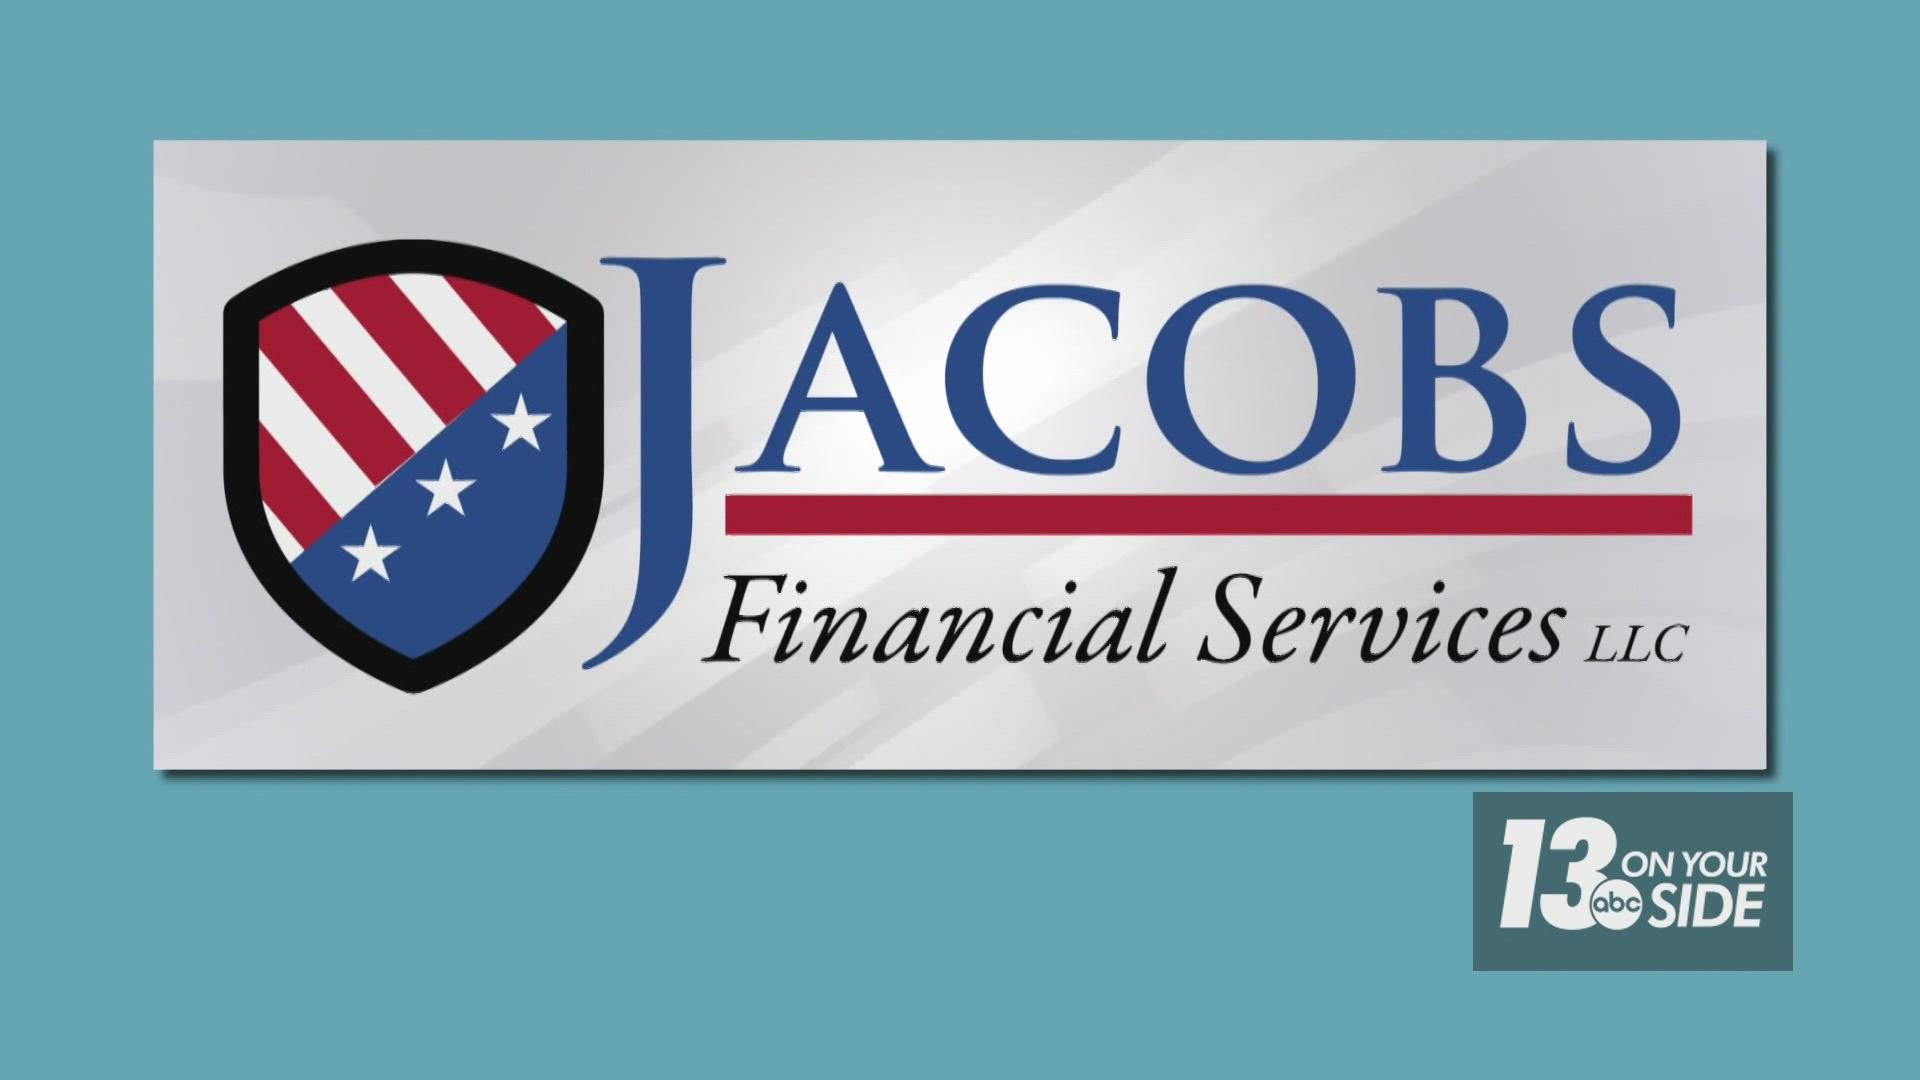 It's time to sit down with Tom Jacobs from Jacobs Financial Services and put in place a “bulletproof plan” for your future.